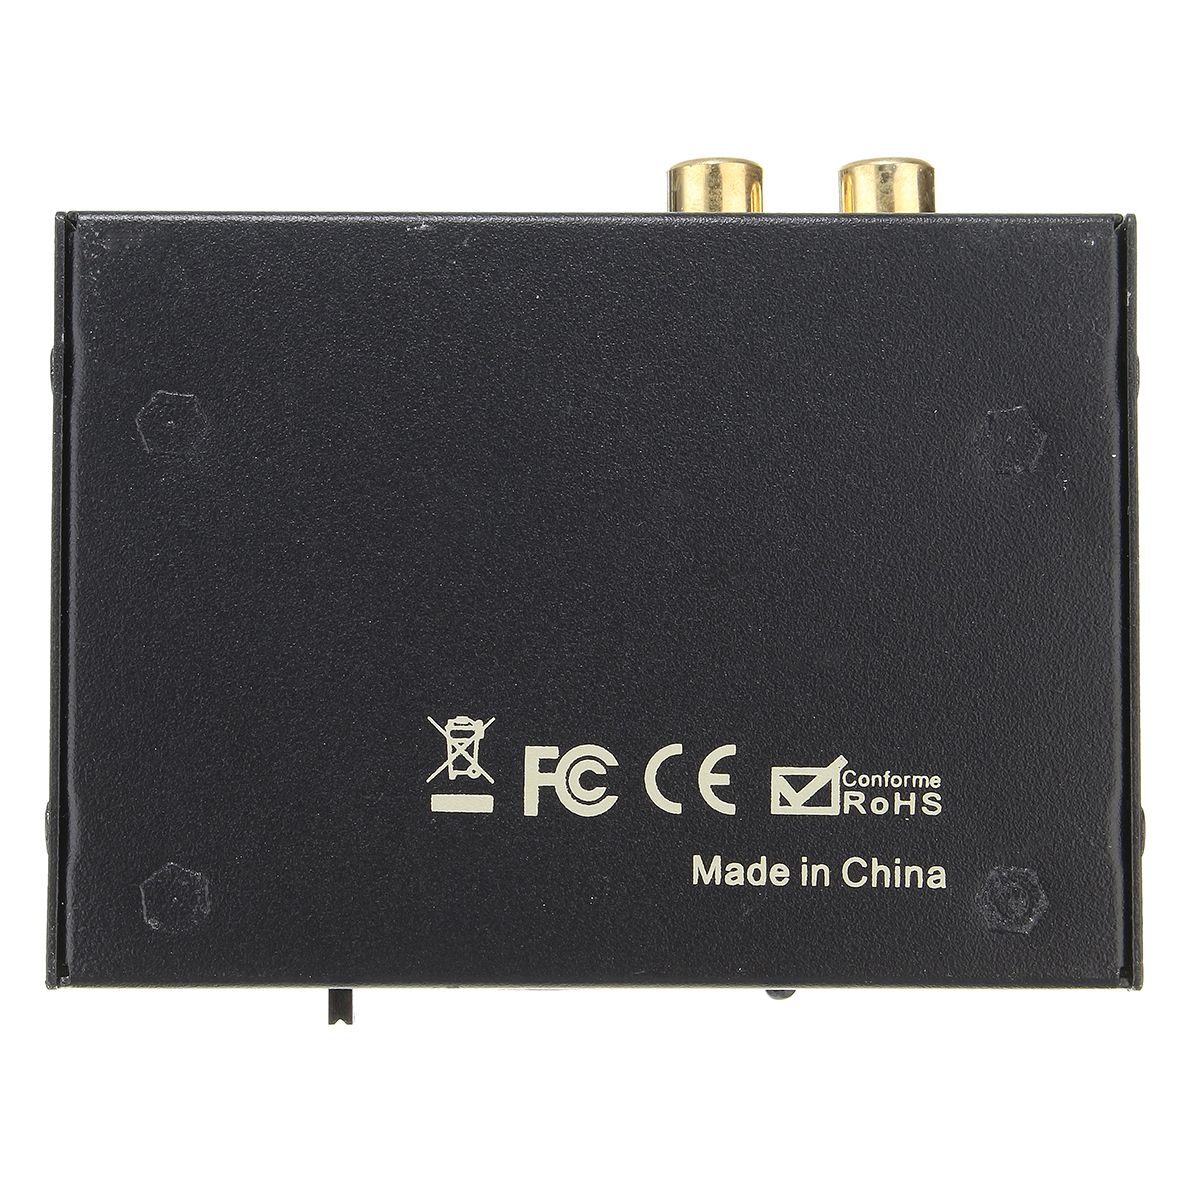 HD-to-HD-and-Optical-SPDIF-RCA-LR-1080P-51CH-Audio-Extractor-Converter-1136863